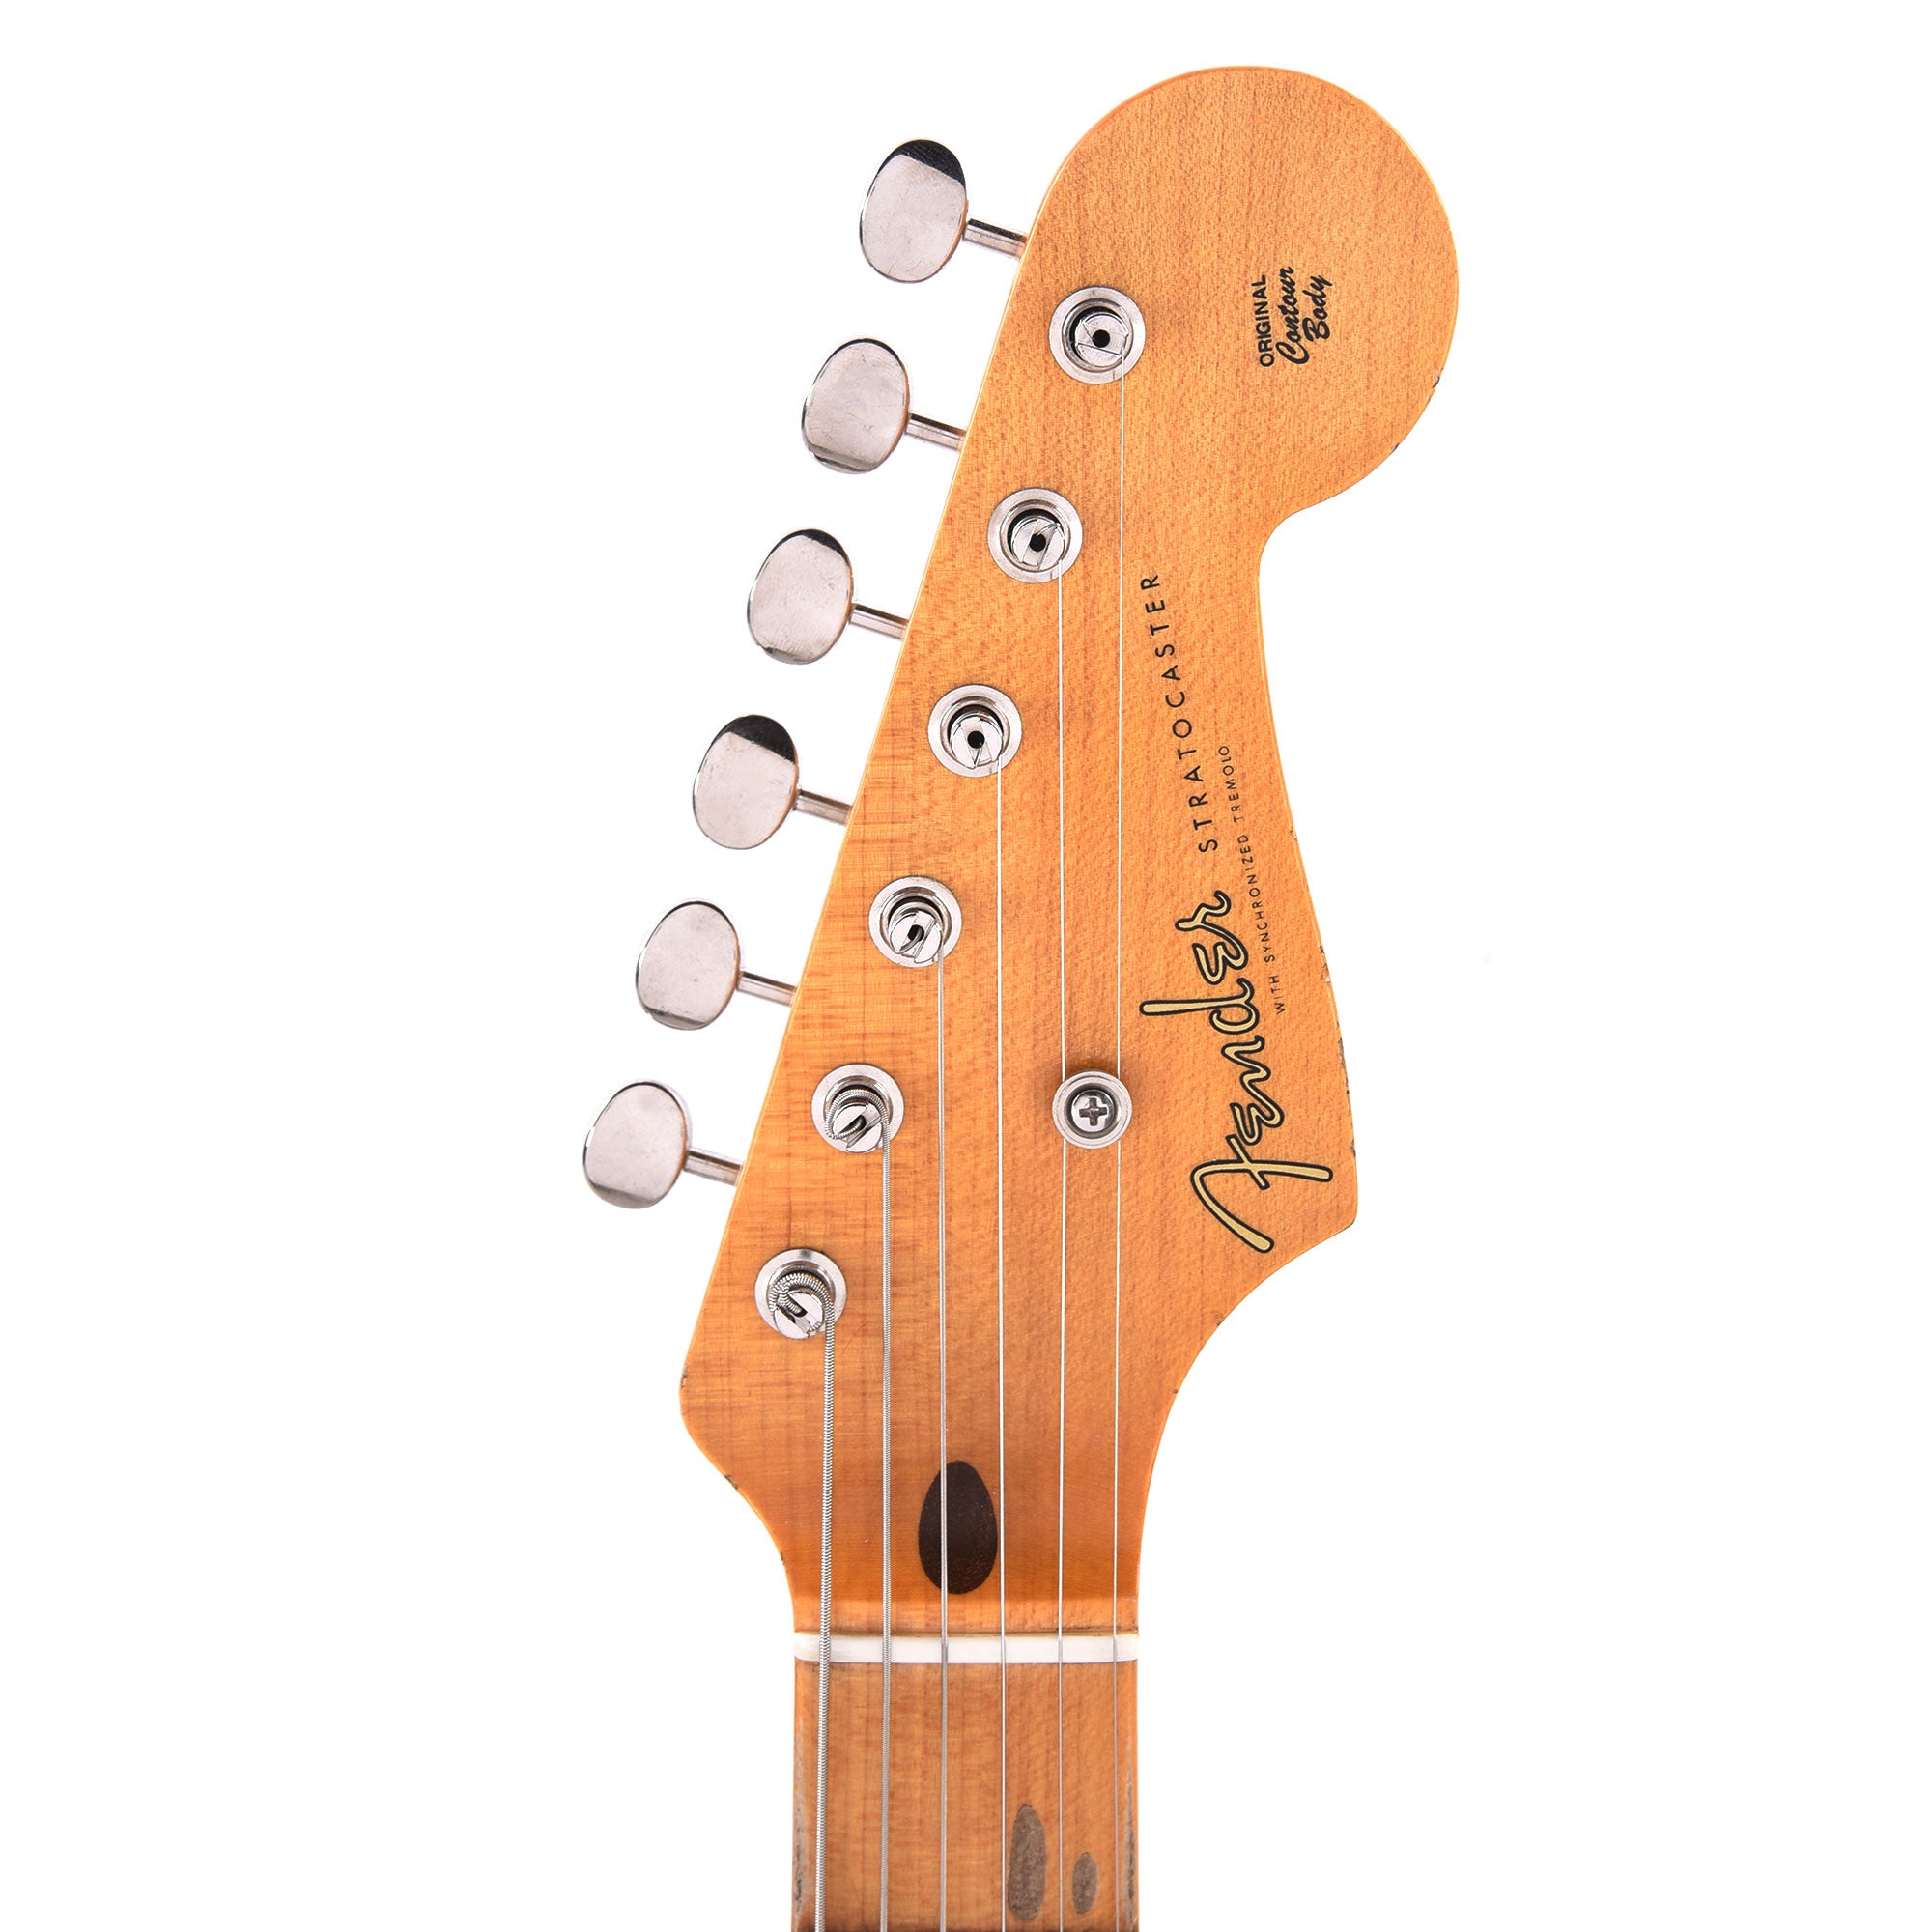 Fender Custom Shop Limited Edition Fat '54 Stratocaster Relic with Closet Classic Hardware Aged White Blonde